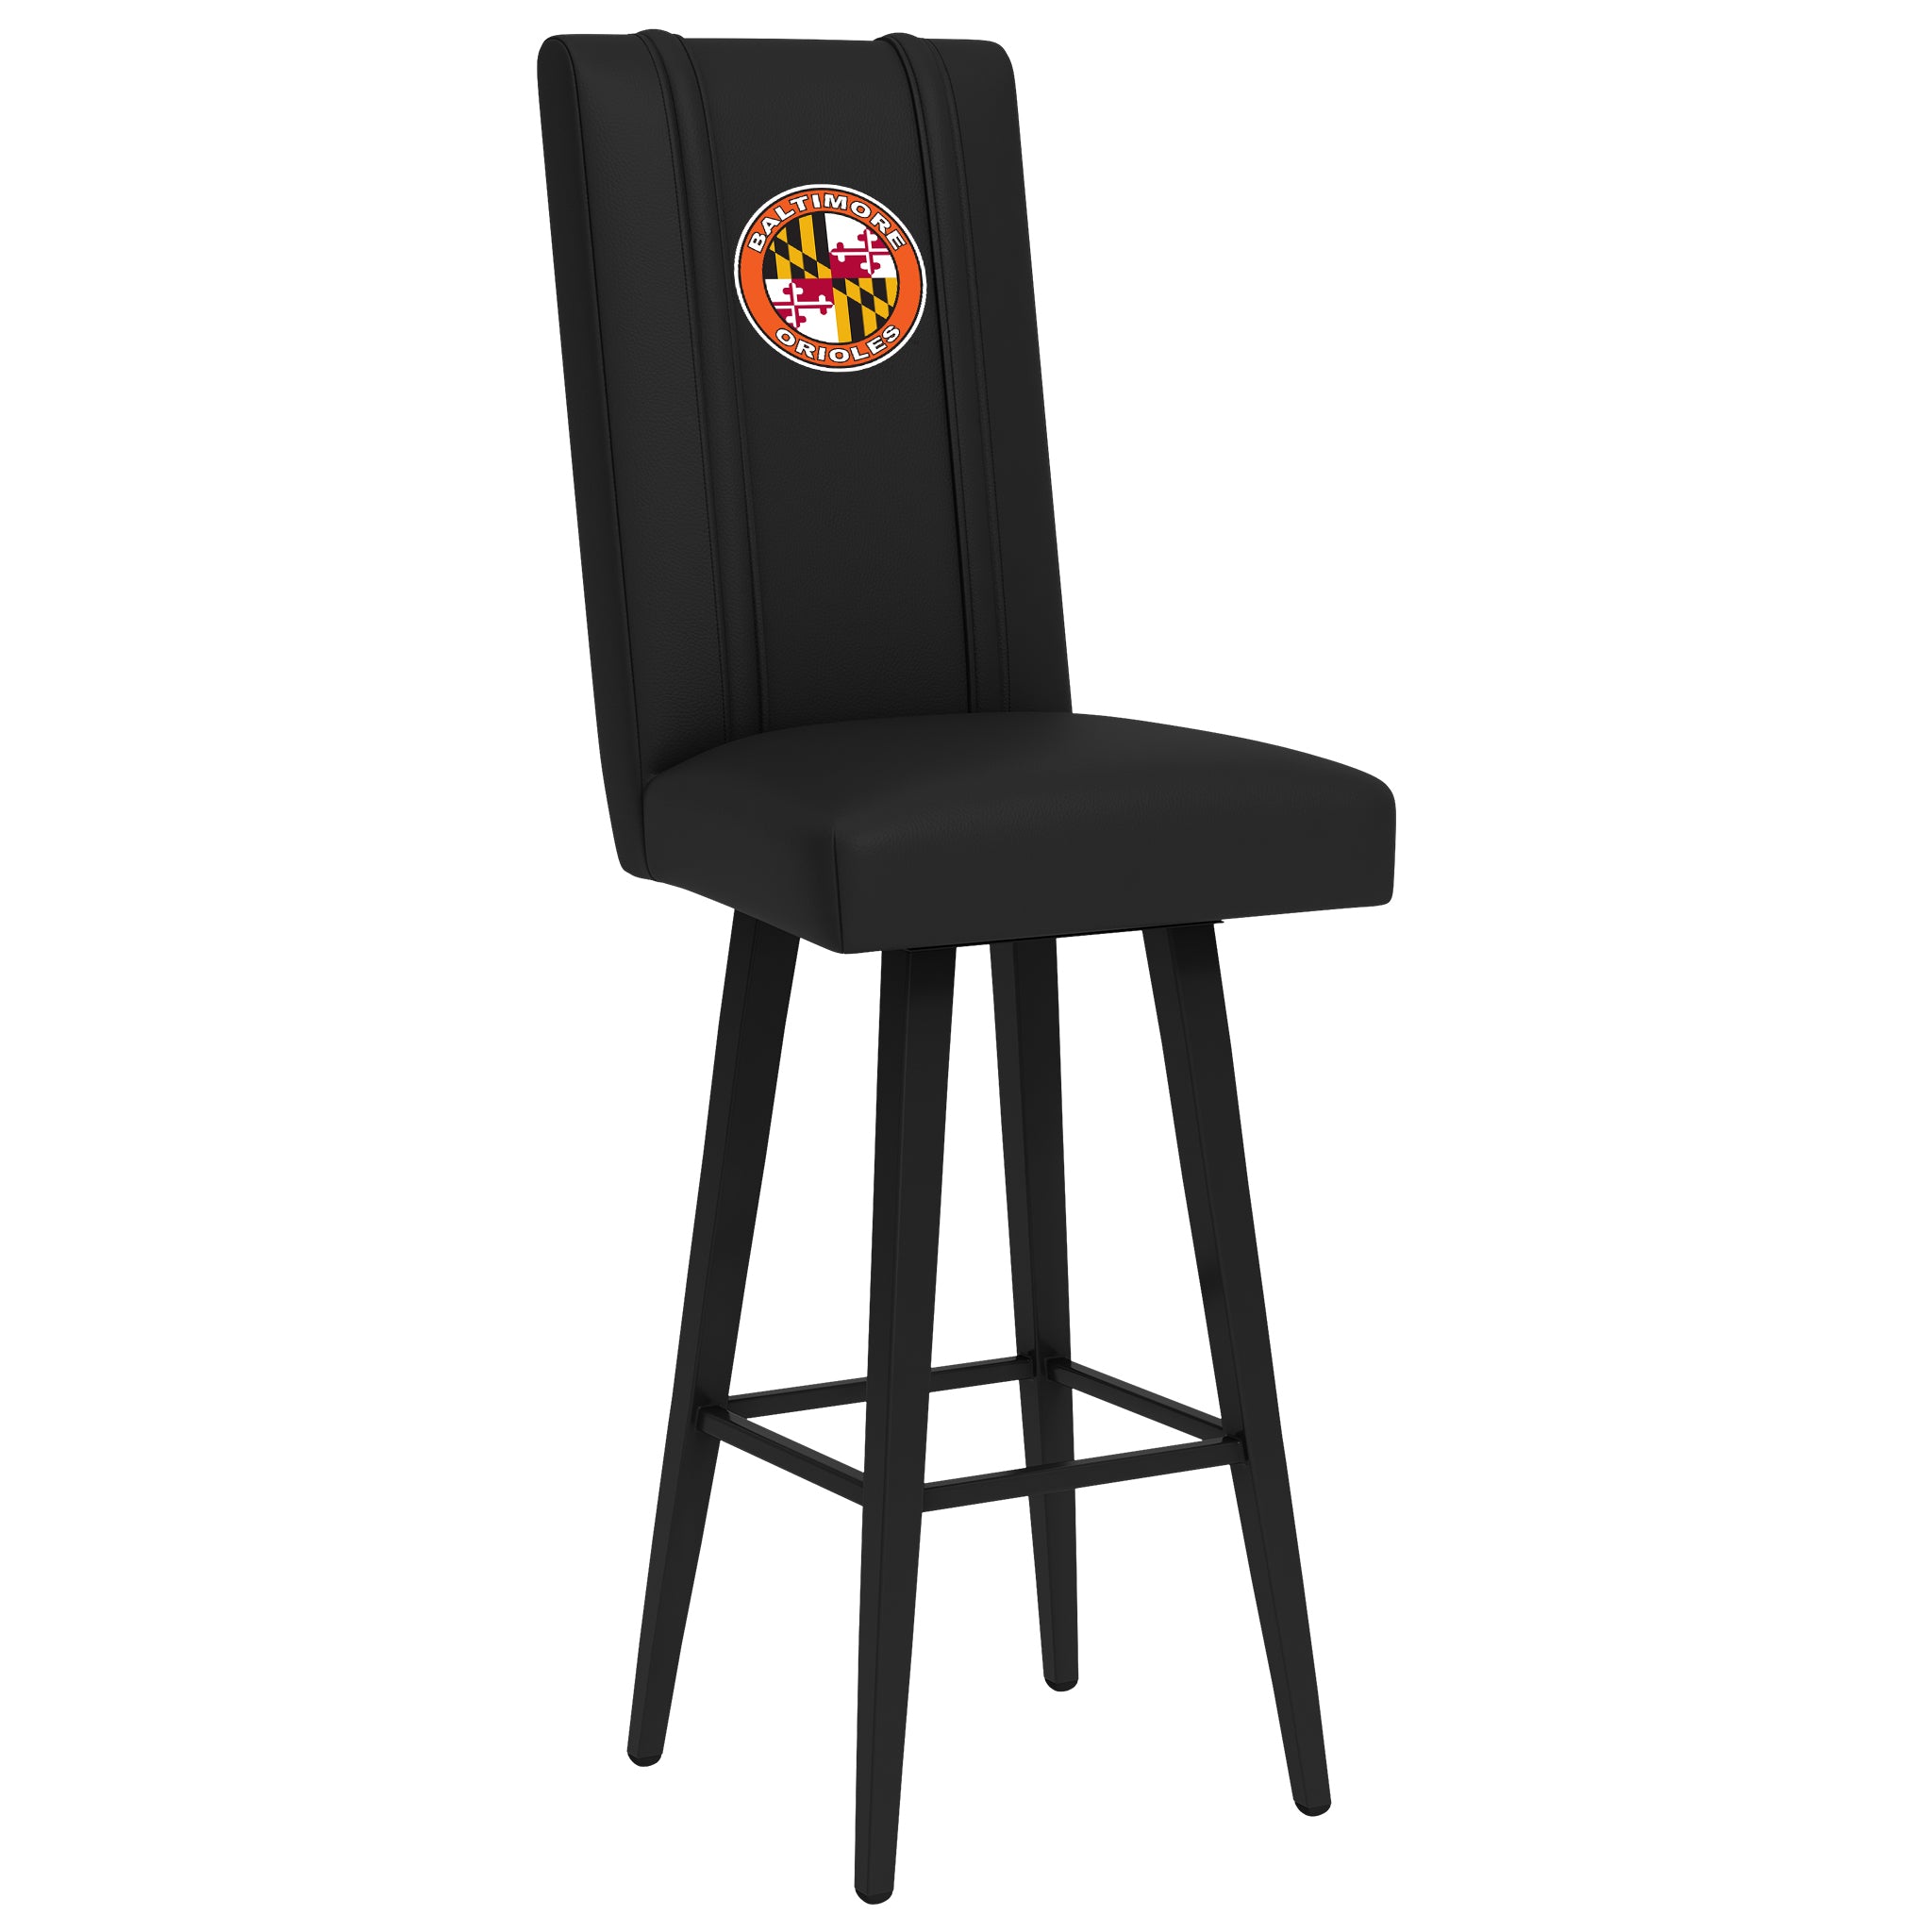 Swivel Bar Stool 2000 with Baltimore Orioles Cooperstown Primary